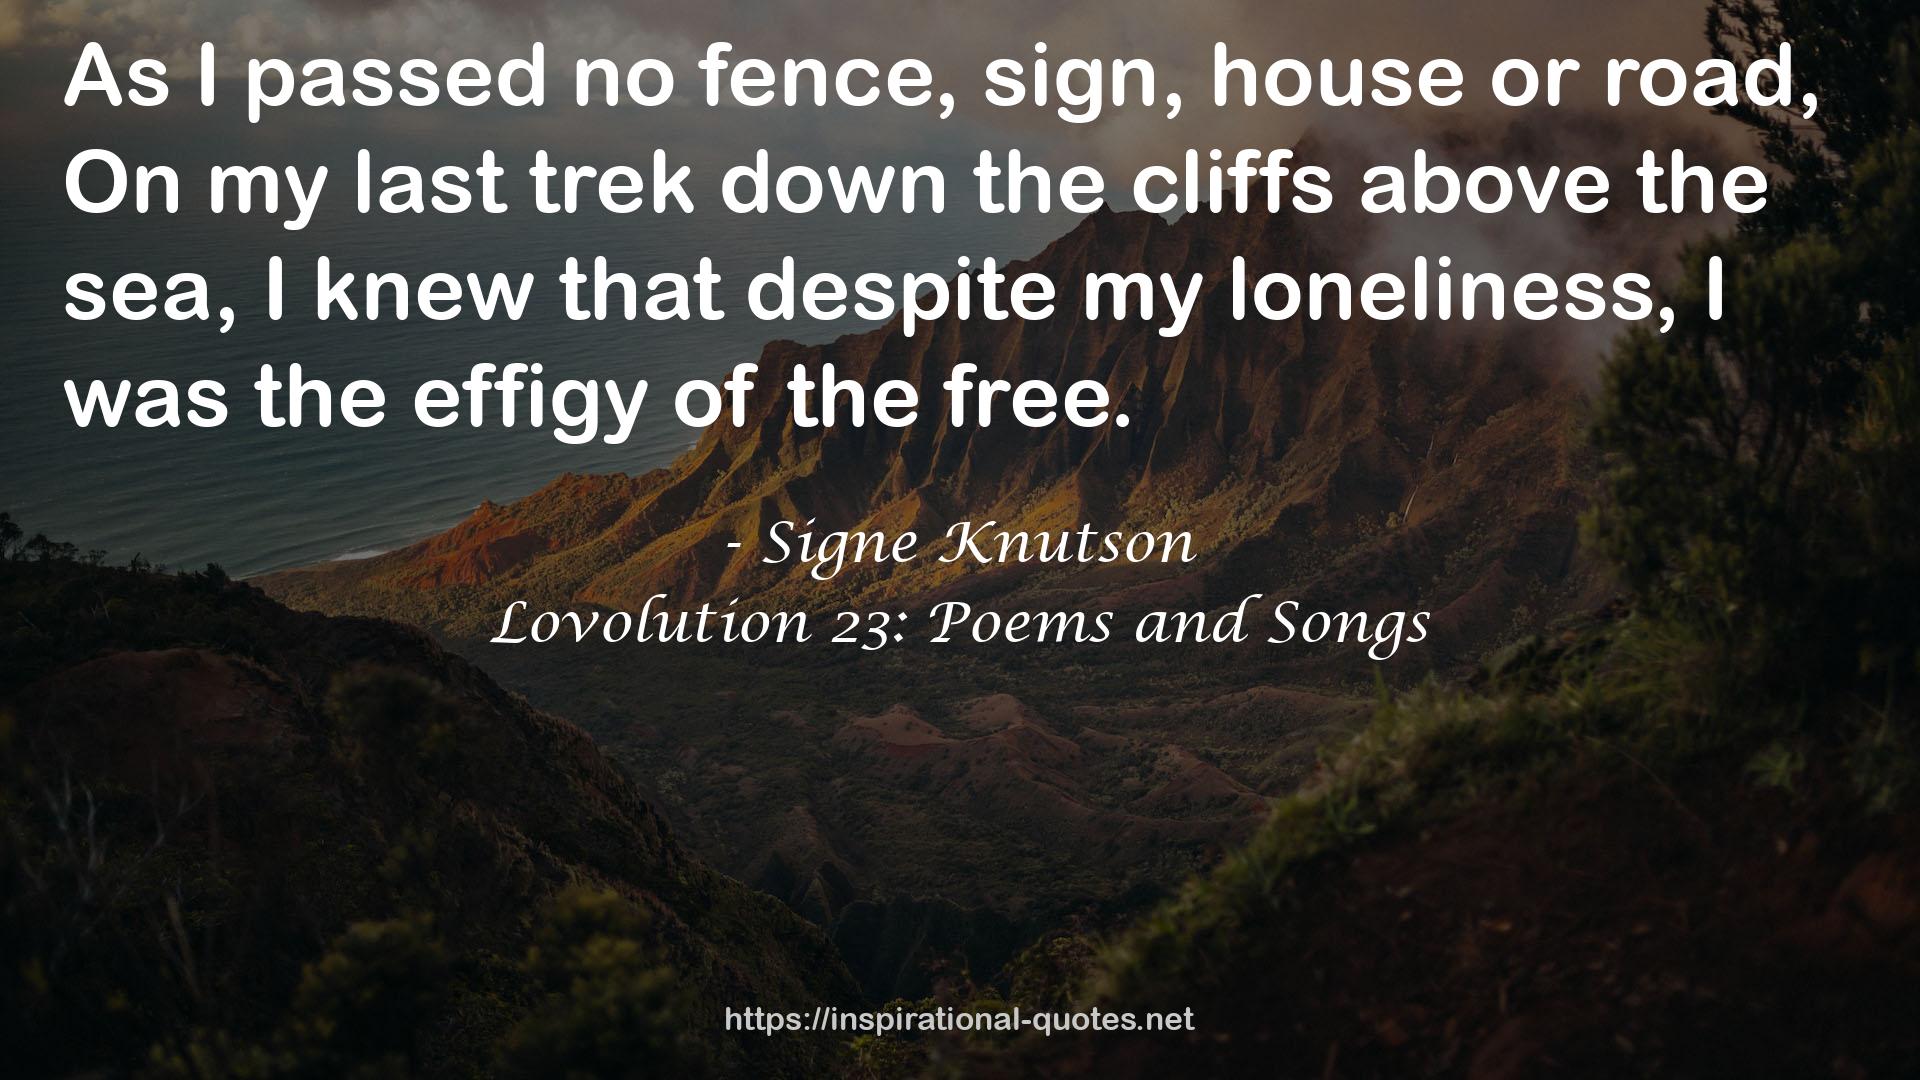 Lovolution 23: Poems and Songs QUOTES